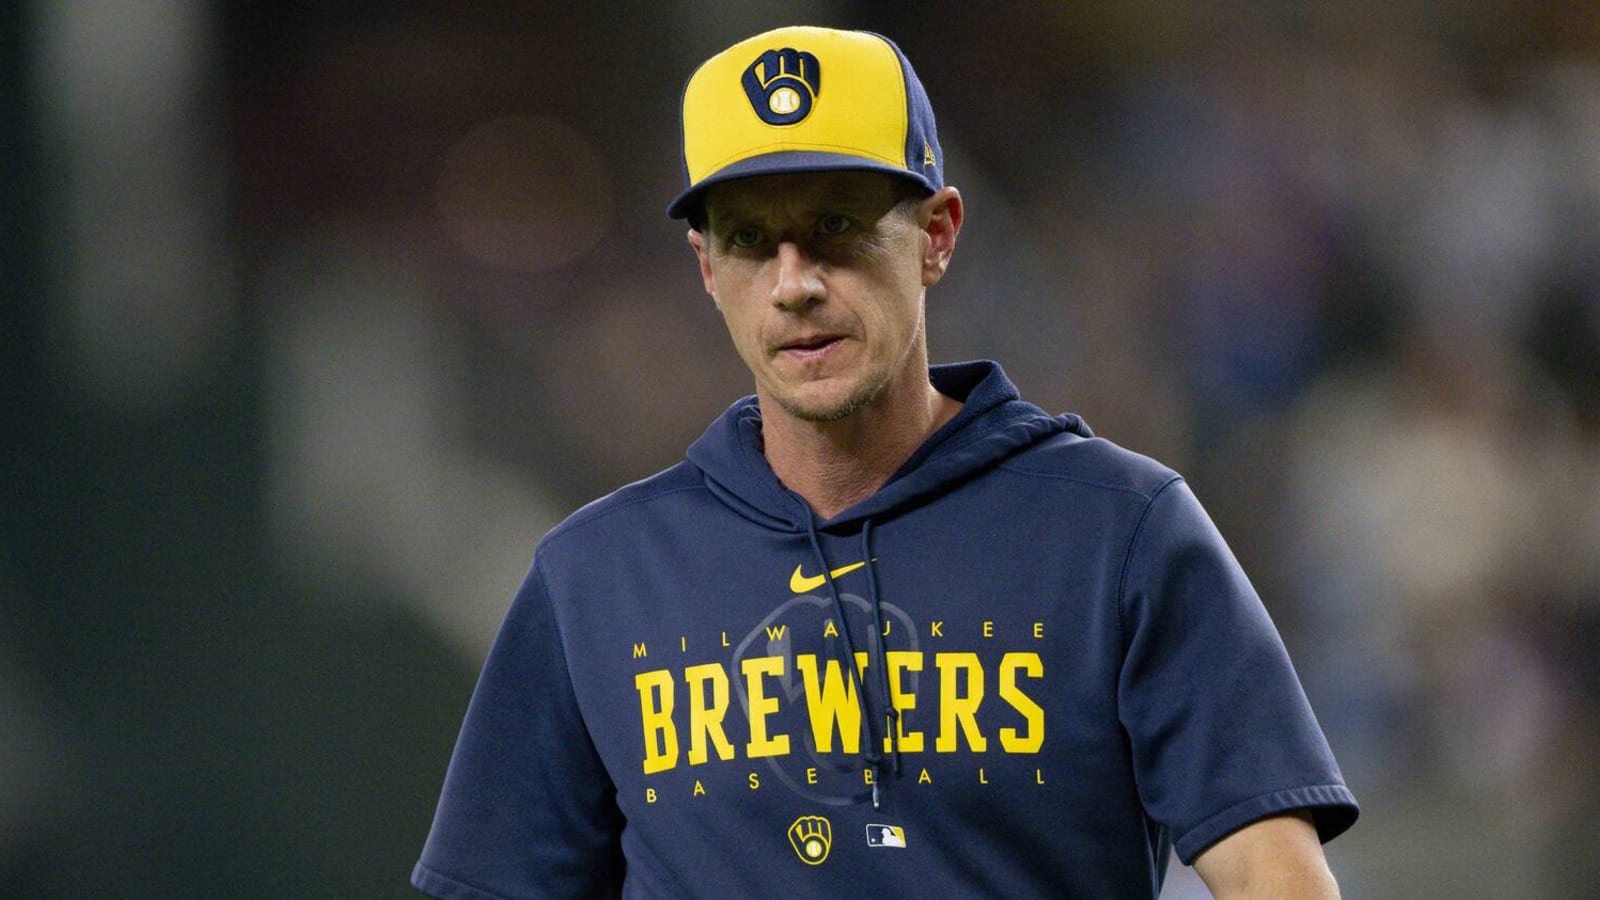 Insider shares if Craig Counsell will consider Mets opening